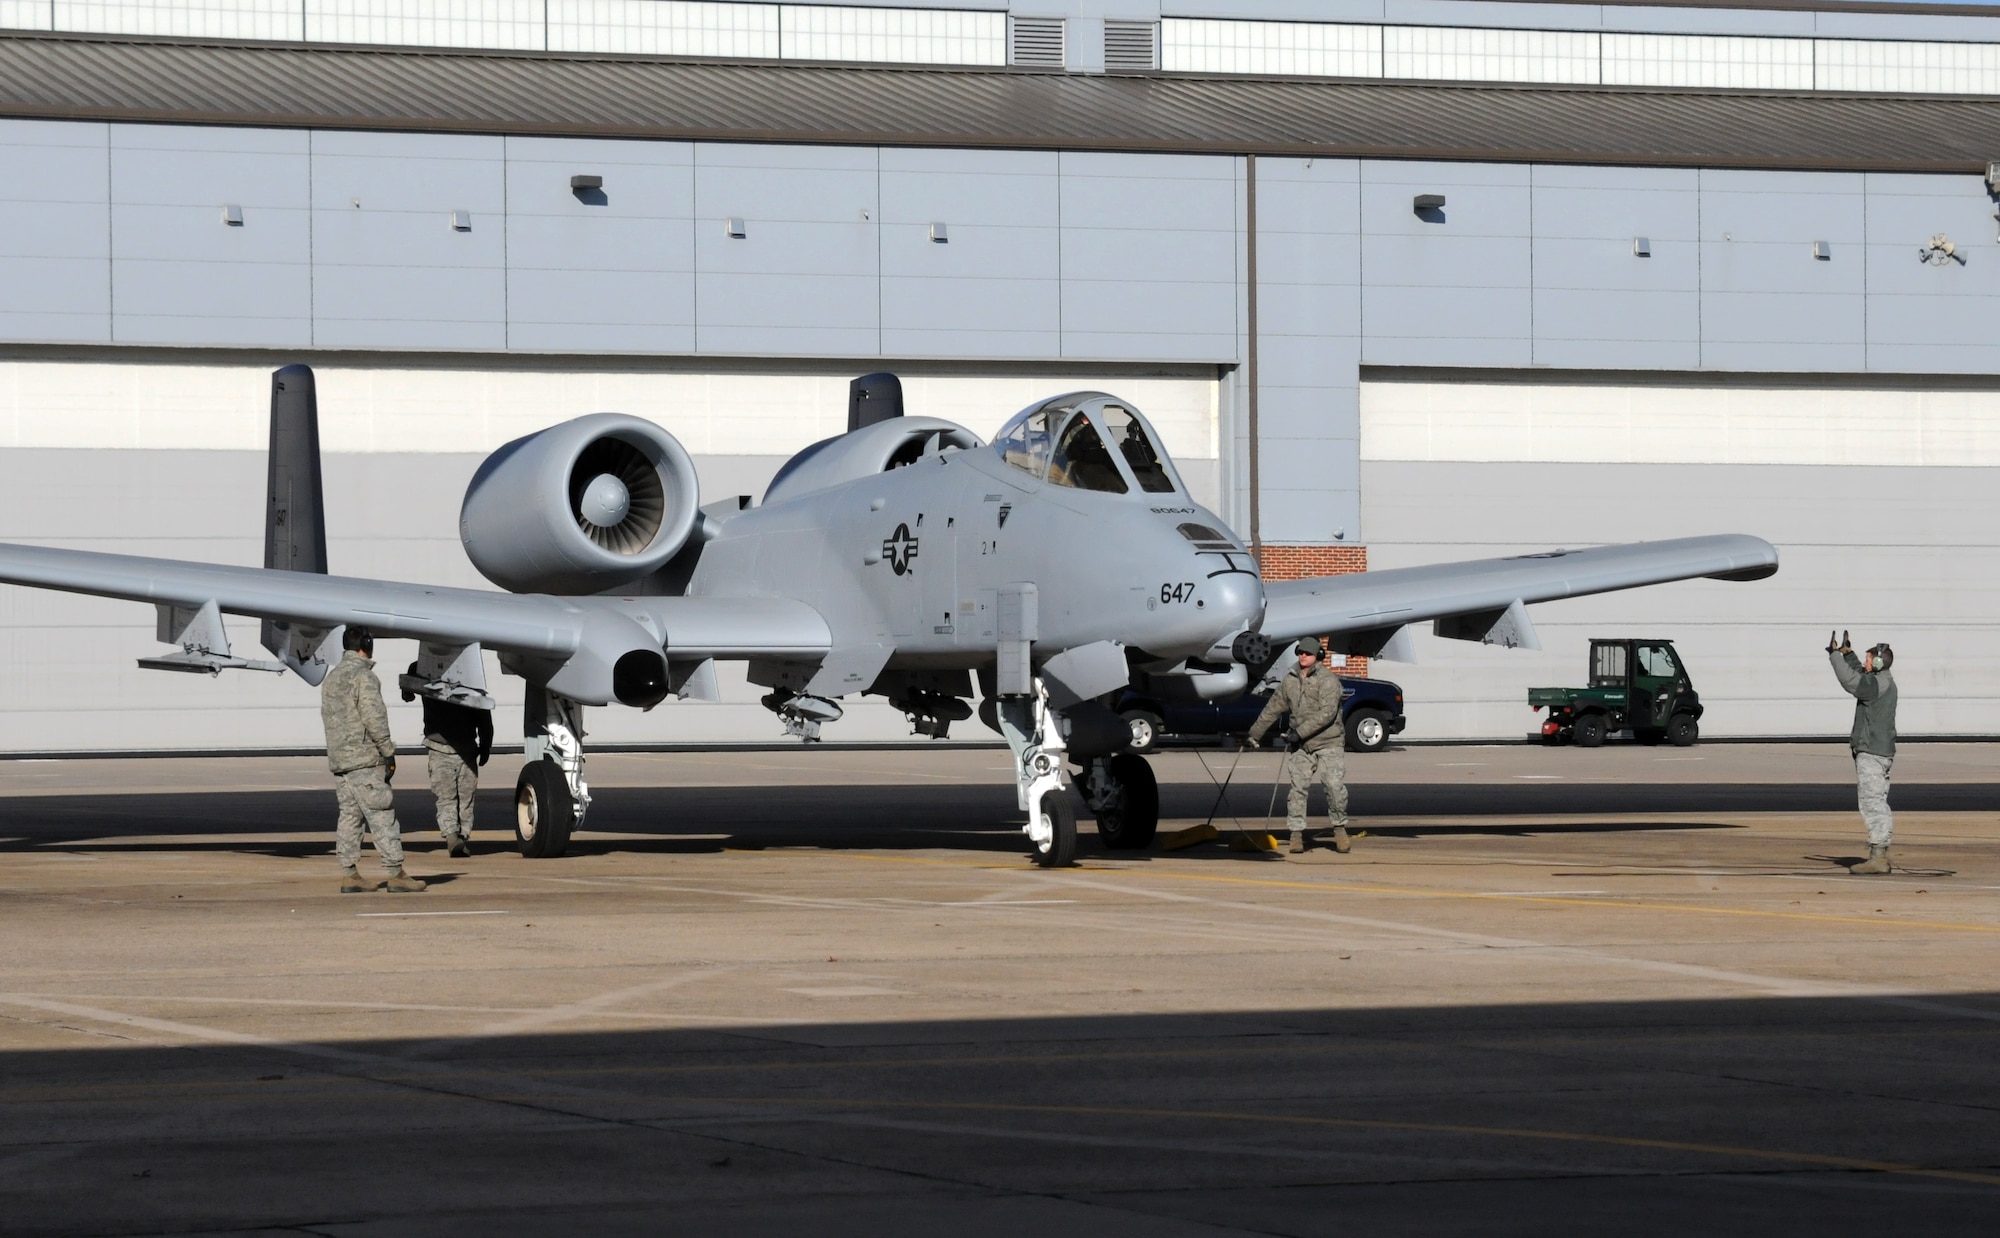 Master Sgt. Jay Greer, a crew chief with the 188th Aircraft Maintenance Squadron, right, preps an A-10C Thunderbolt II "Warthog" (Tail No. 0647) for departure to Moody Air Force Base, Ga., Jan. 15, 2014. Tail Nos. 0129 and 0647 were transferred from the 188th Fighter Wing’s Ebbing Air National Guard Base, Fort Smith, Ark., as part of the wing’s on-going conversion from a fighter mission to remotely piloted aircraft and Intelligence mission, which will include a space-focused targeting squadron. The 188th now has nine remaining A-10s left on station. The A-10s will join Moody AFB’s 75th Fighter Squadron. (U.S. Air National Guard photo by Tech Sgt. Josh Lewis/188th Fighter Wing Public Affairs)

